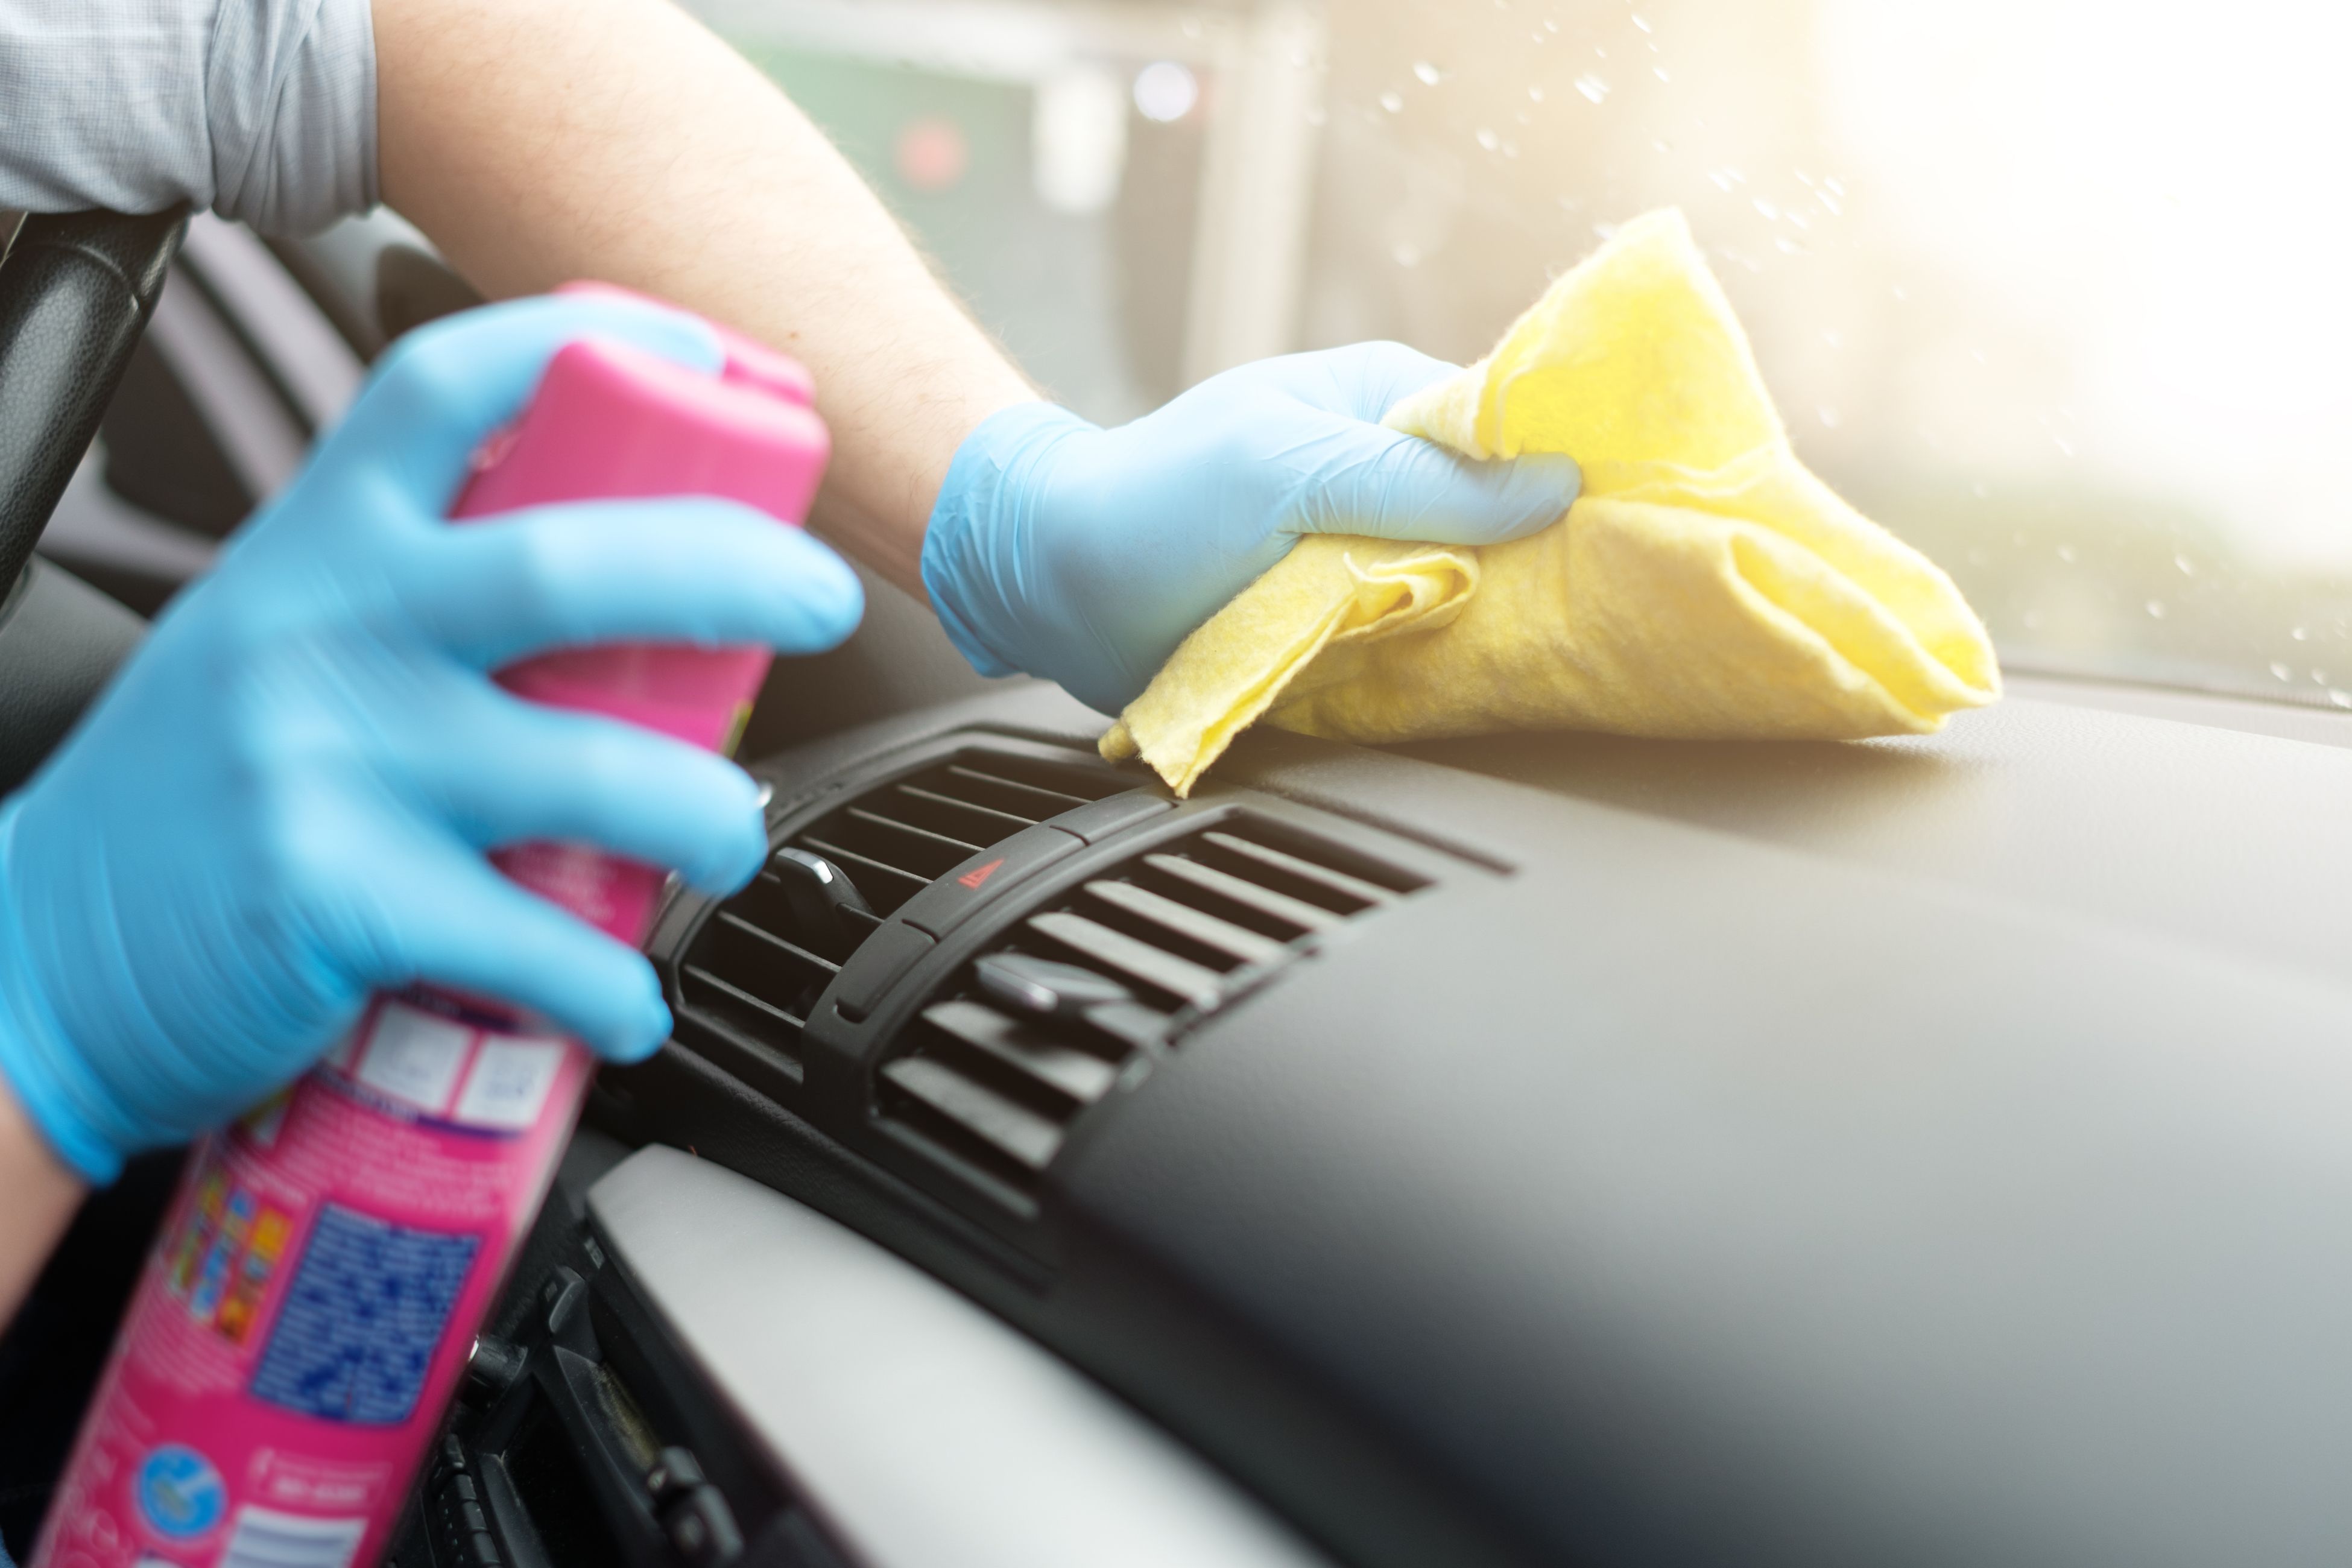 How to Clean and Disinfect a Car Interior